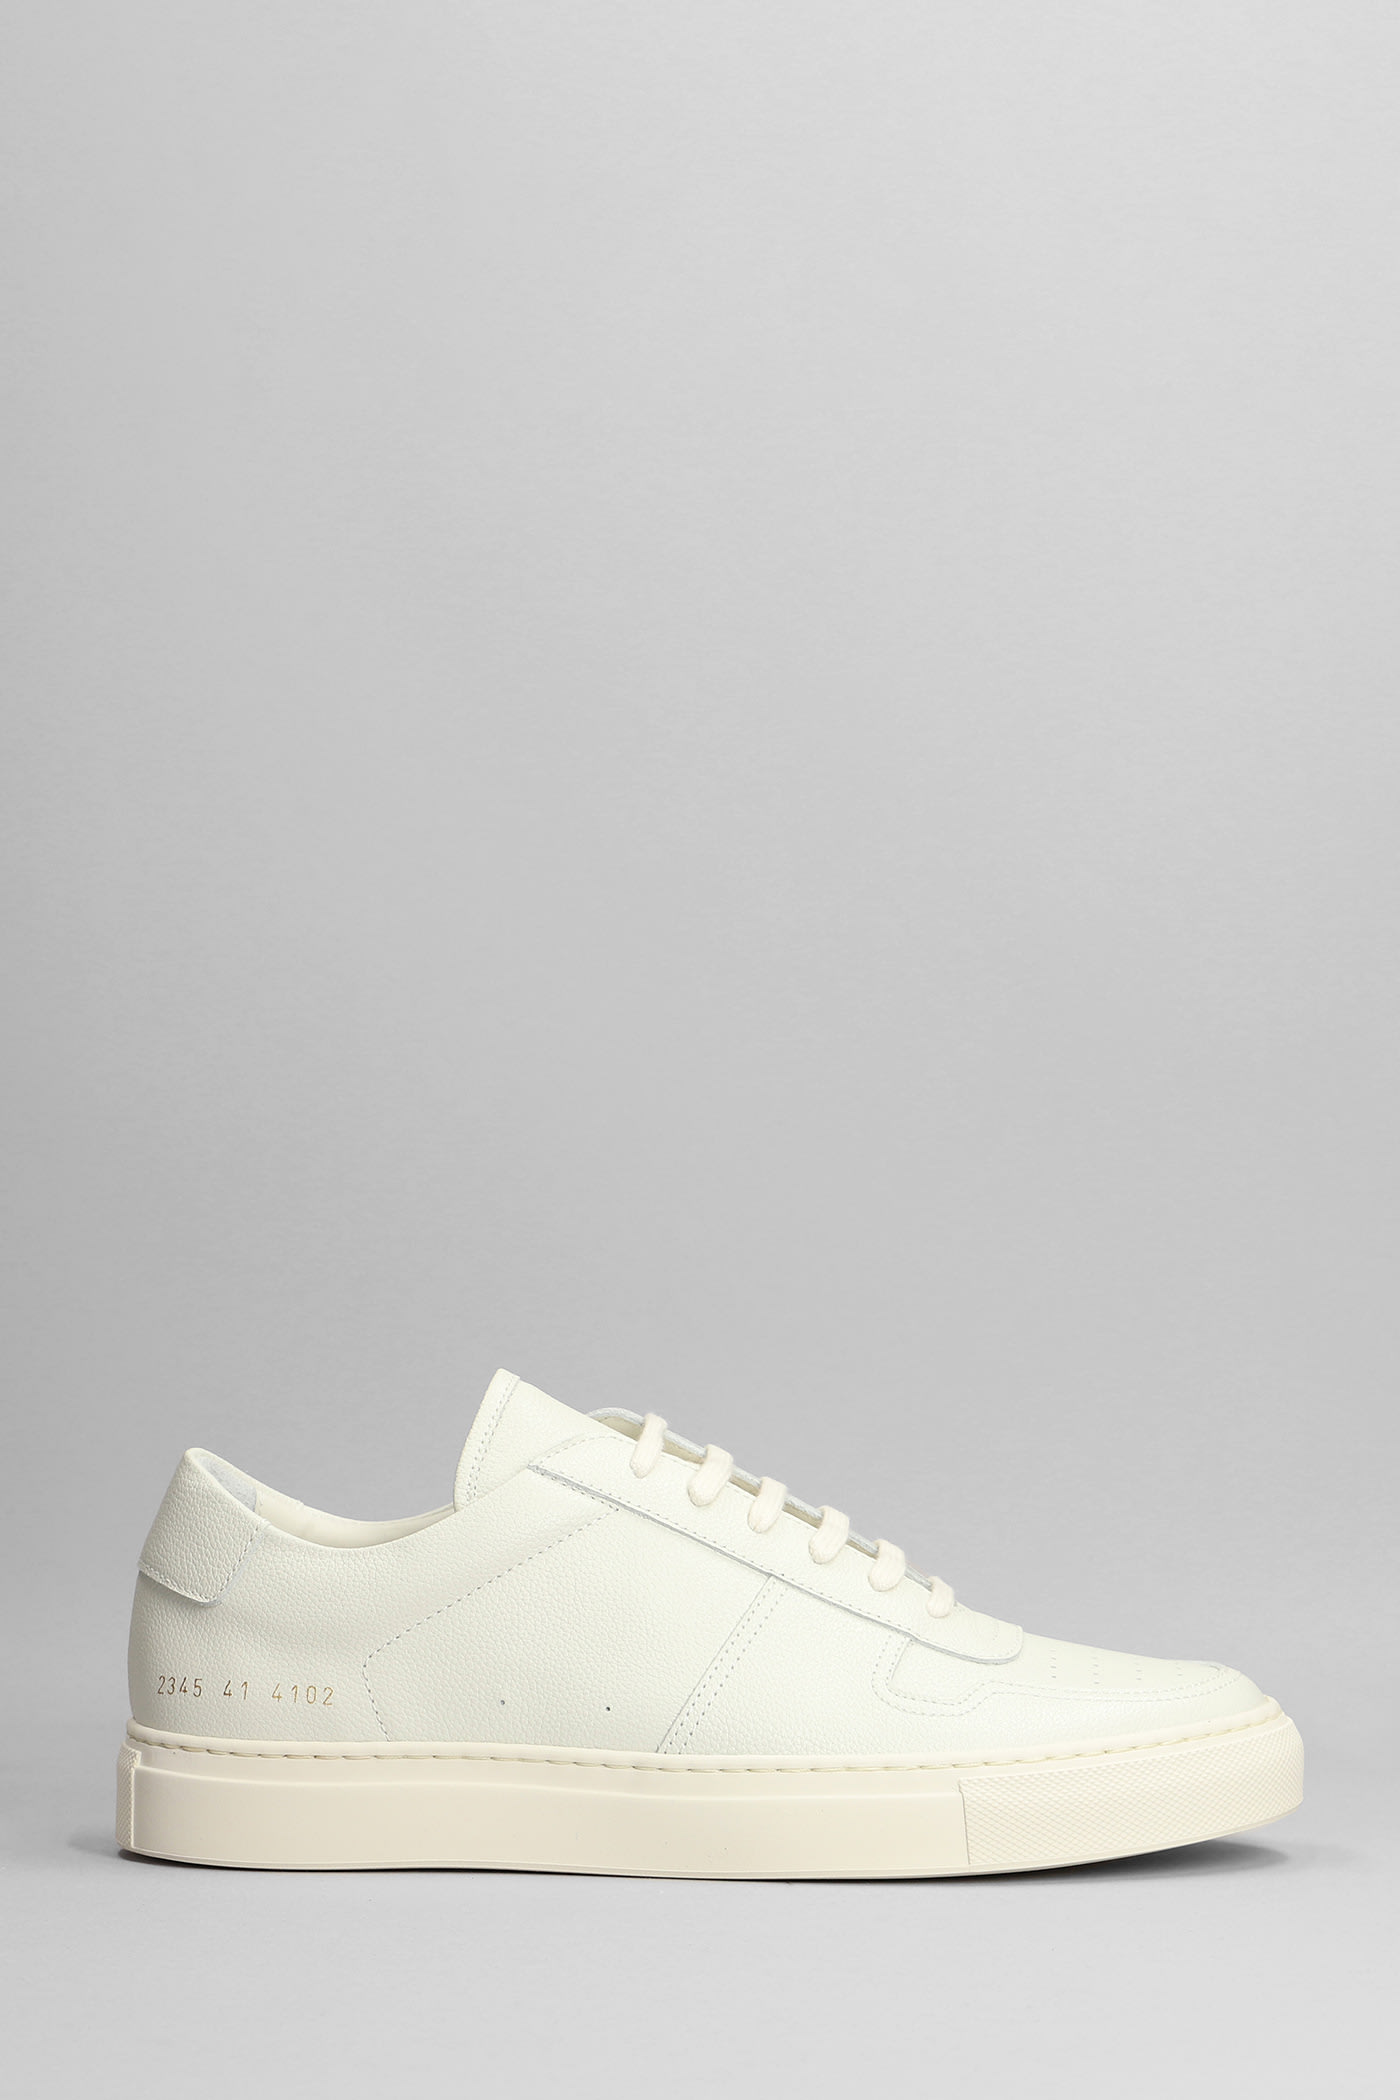 Common Projects Bball Sneakers In White Leather